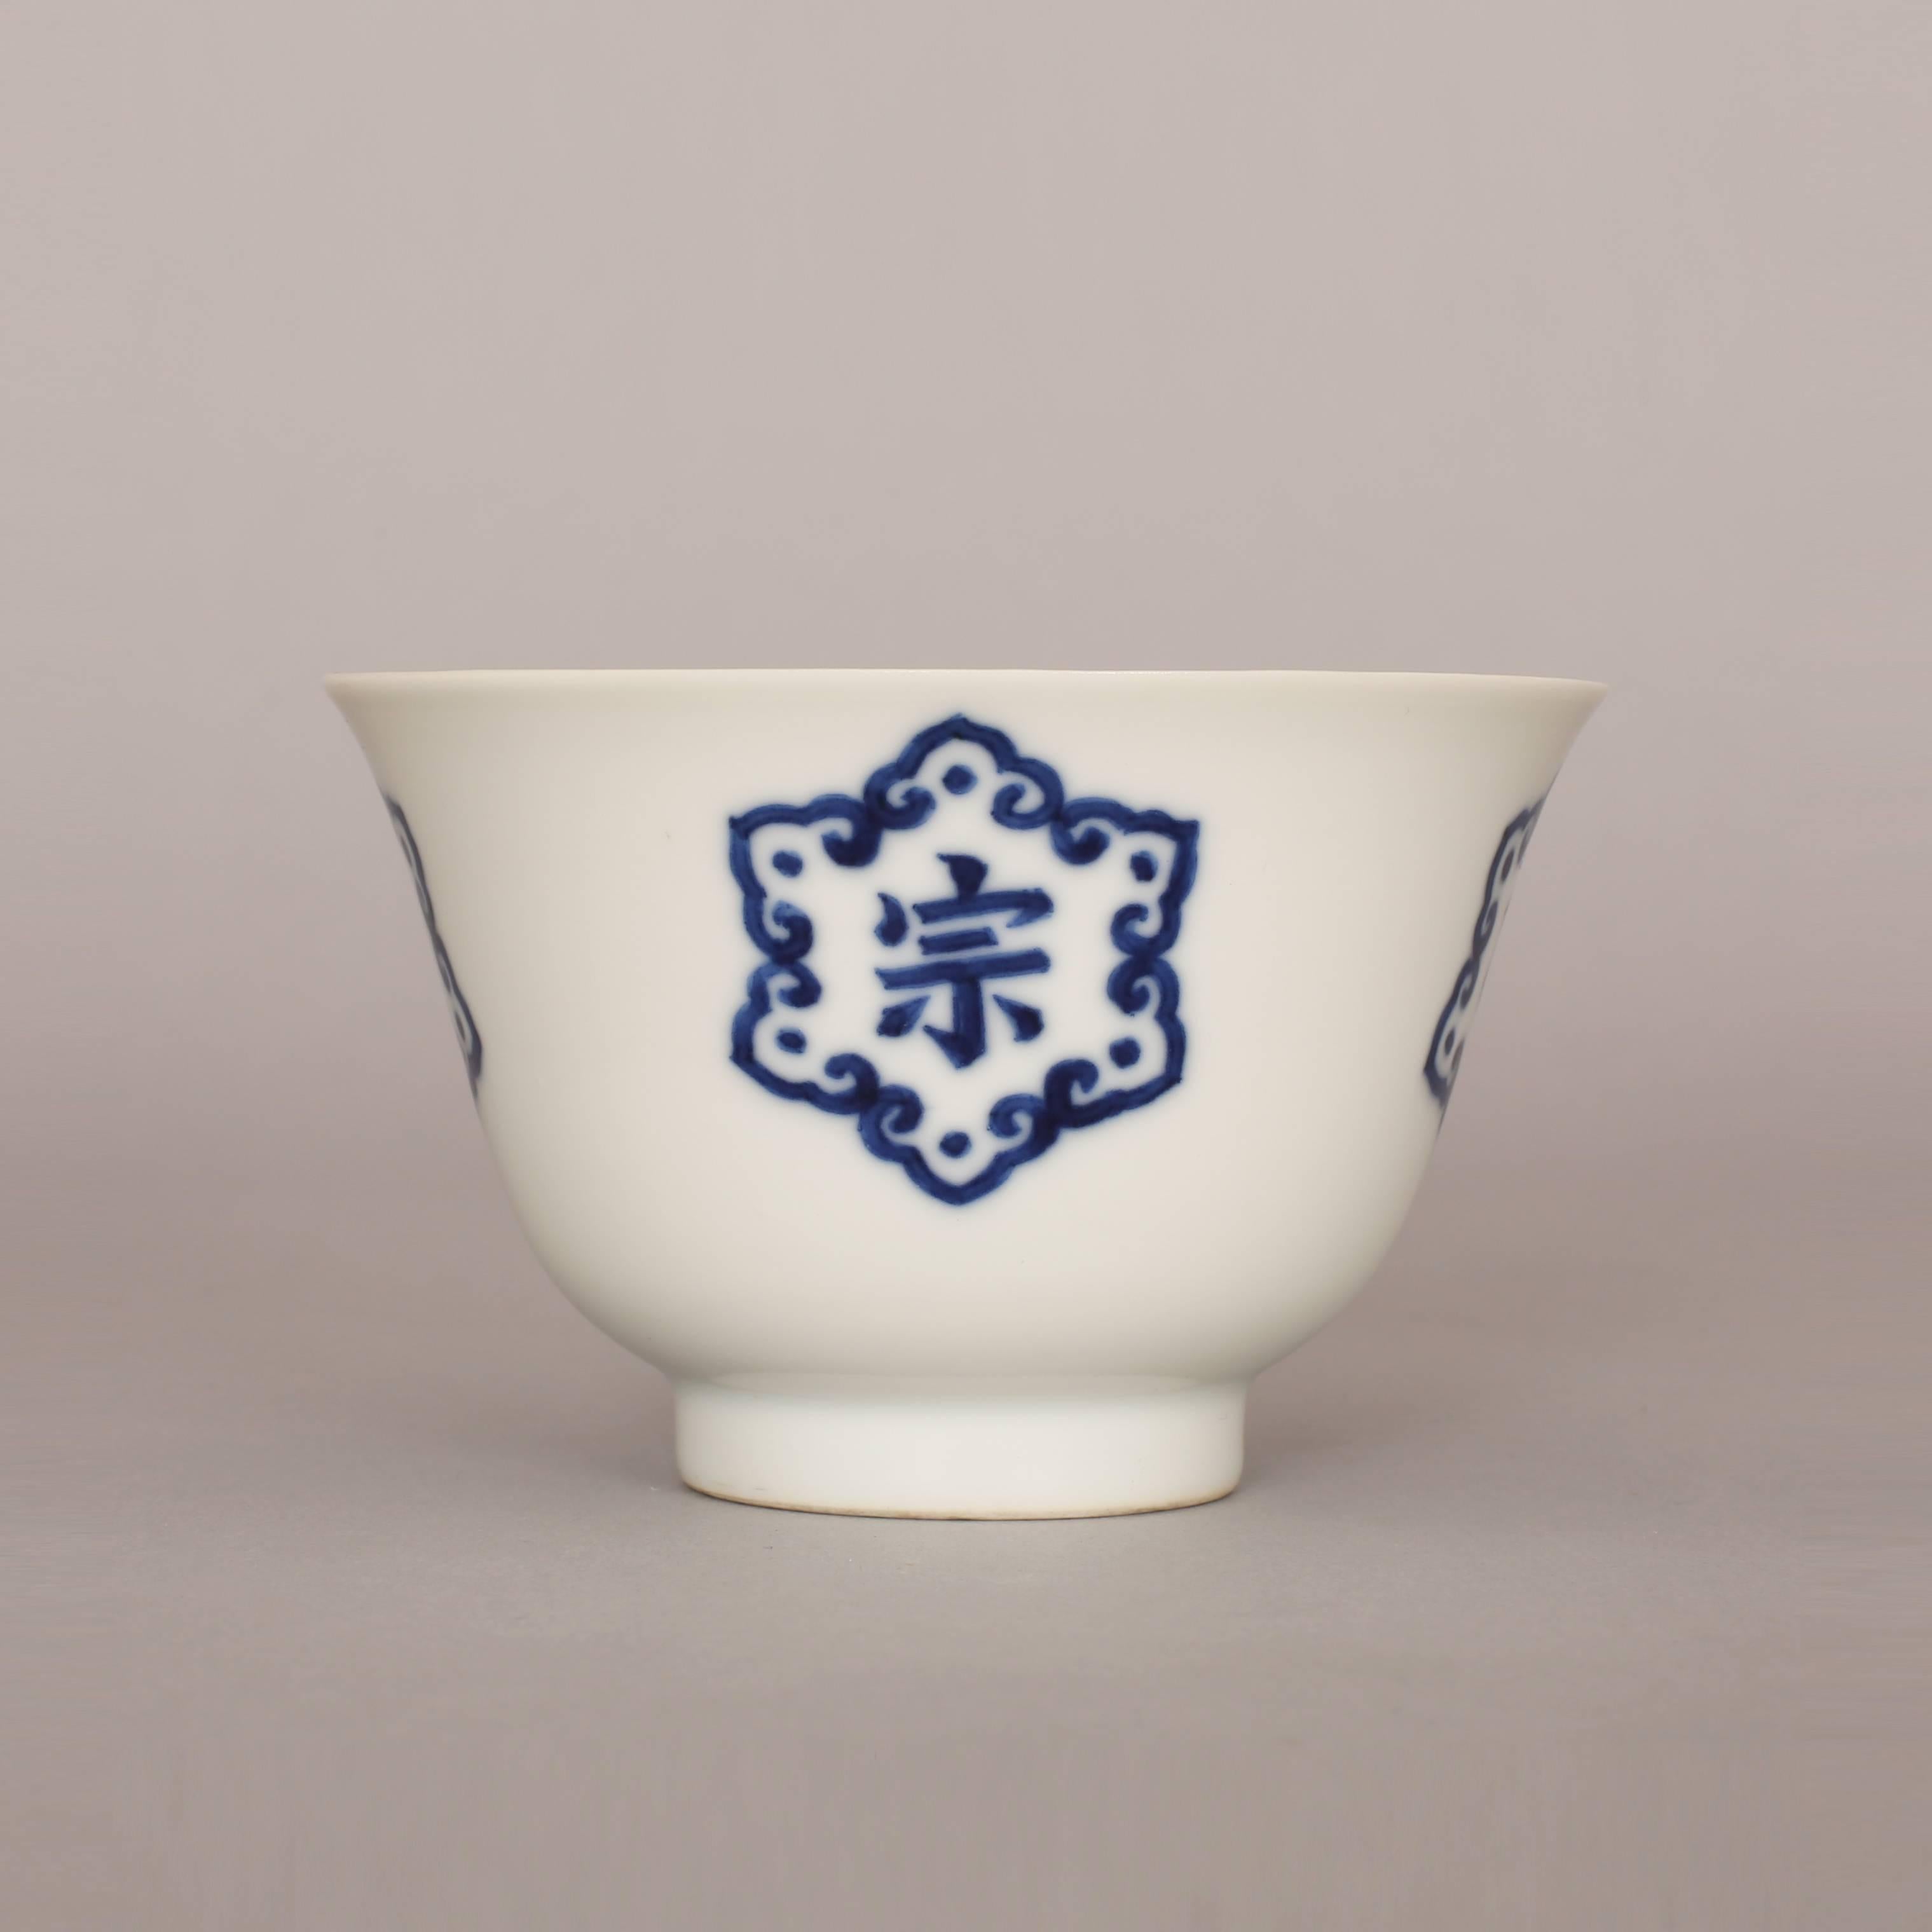 Ceramic Chinese Porcelain Wine Cup ‘Wu Shi Zong Ci’ Characters, 19th Century